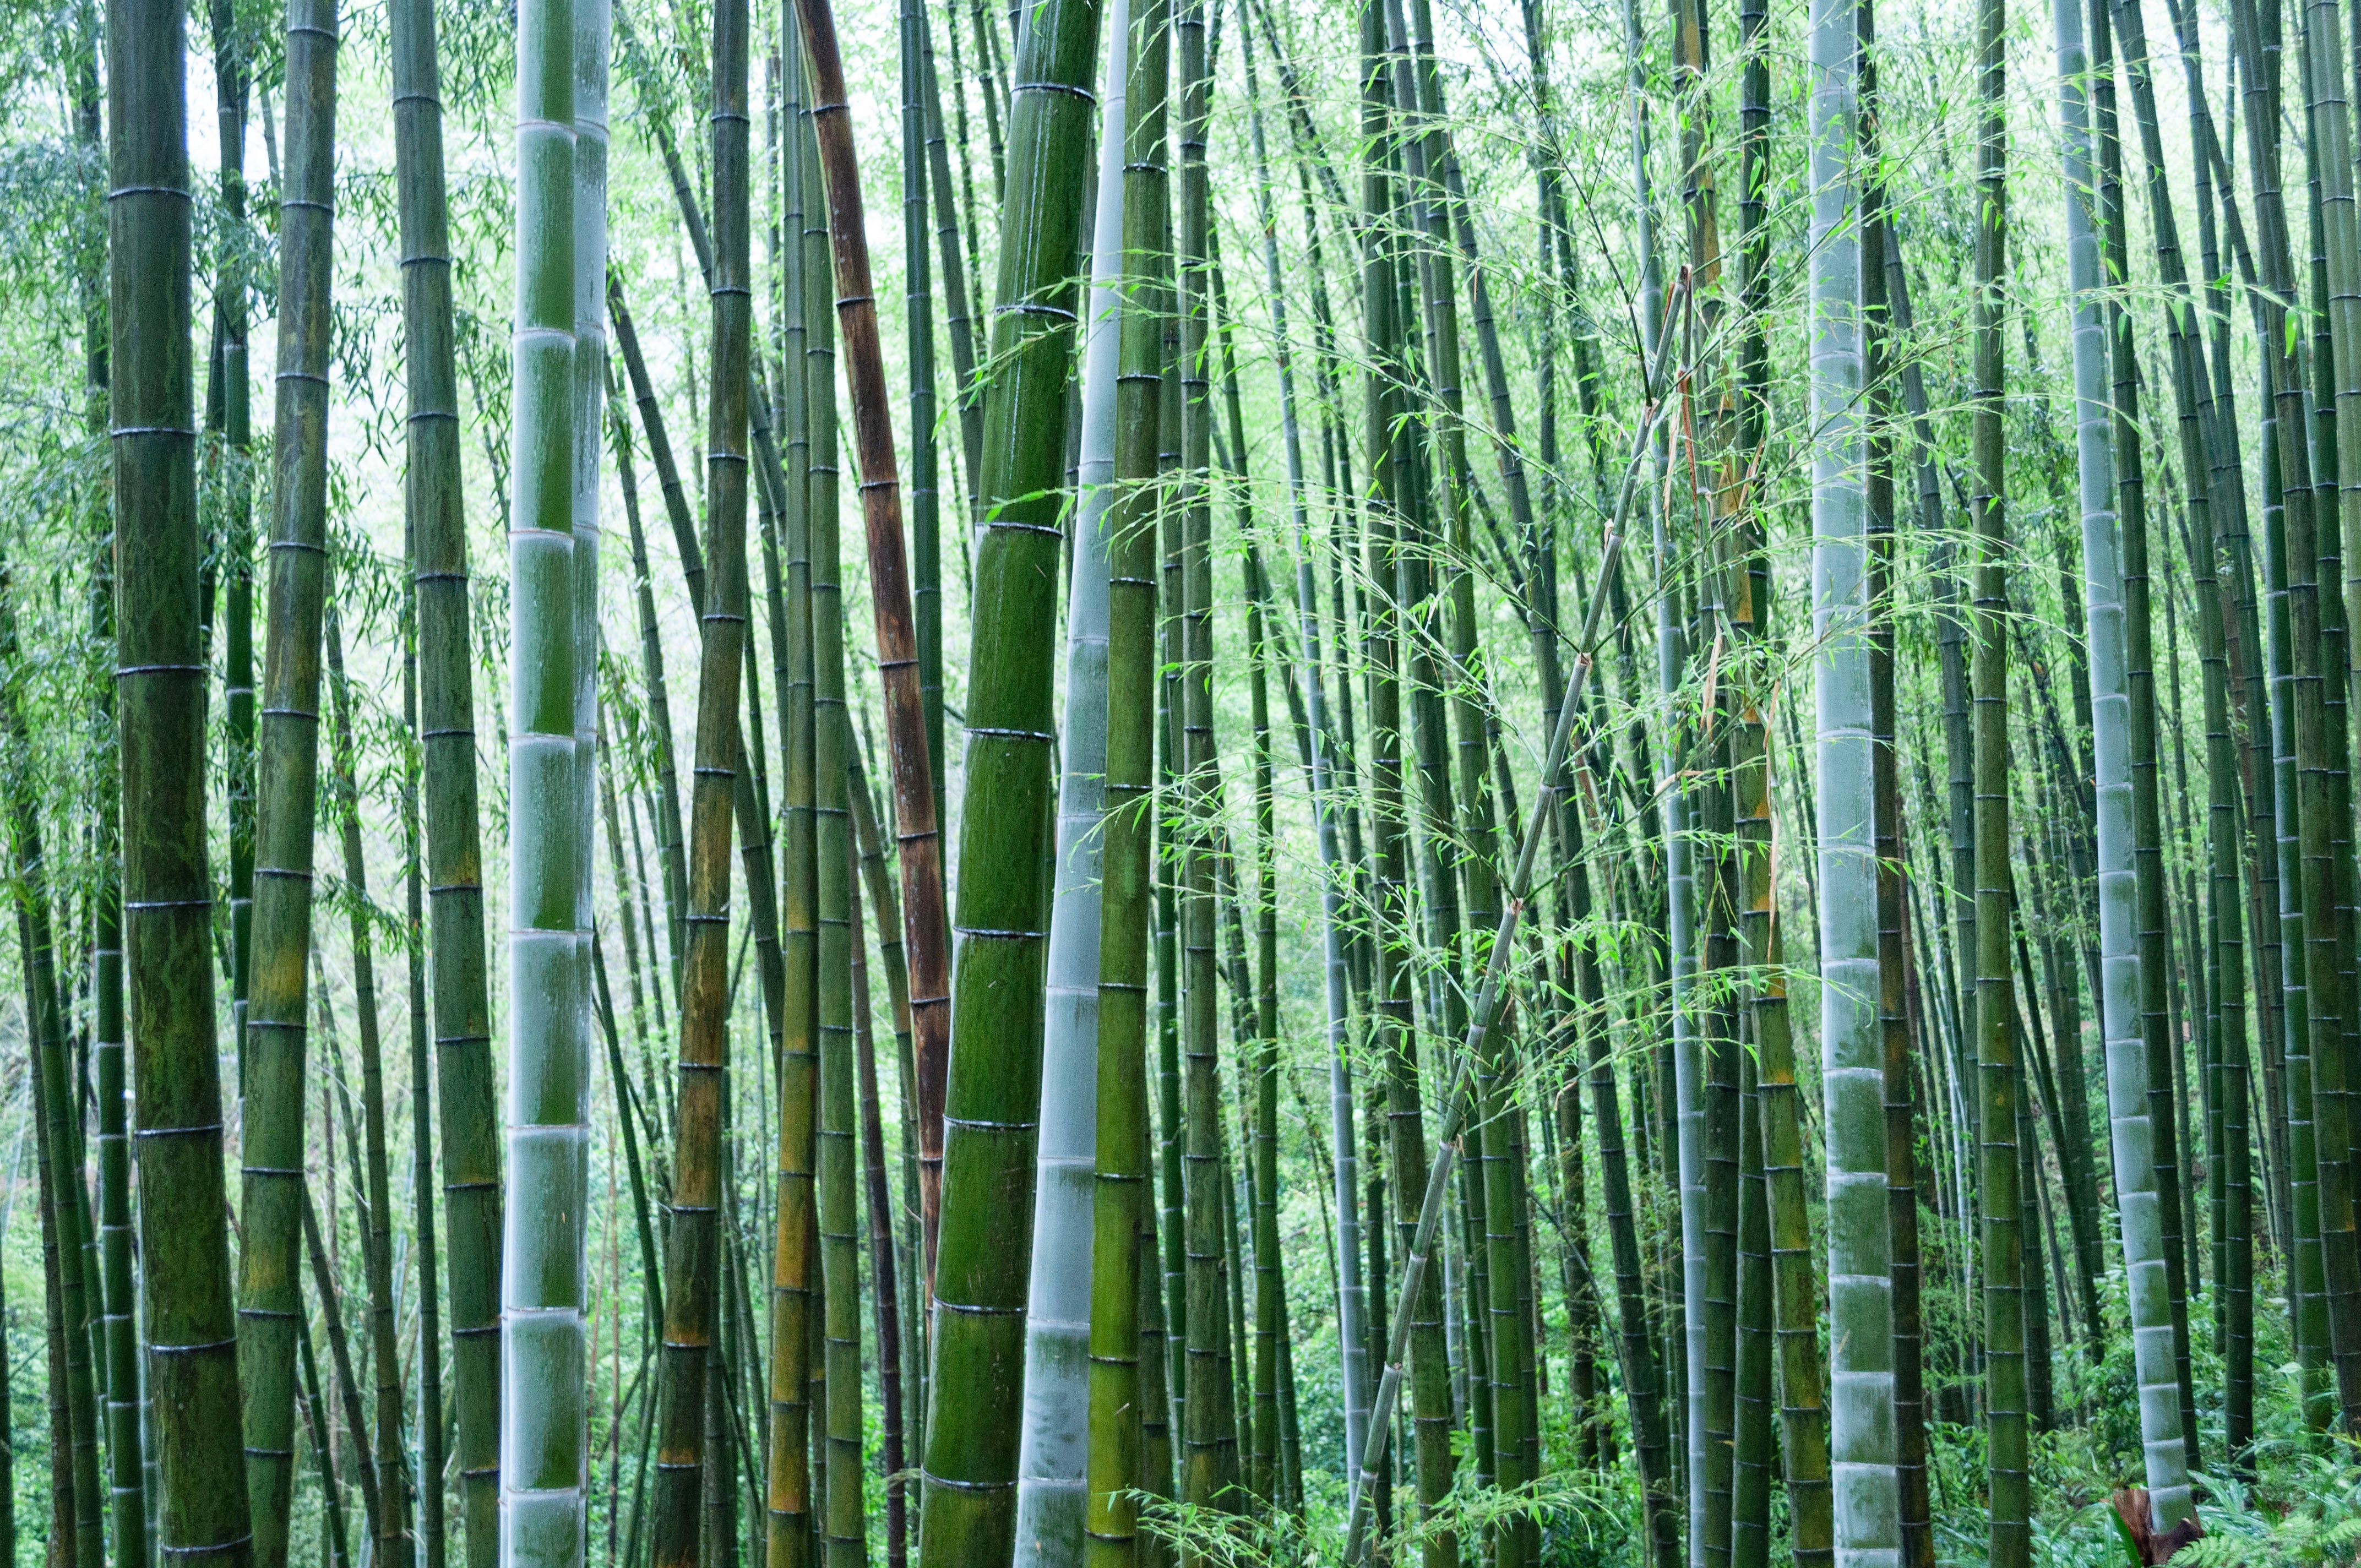 Thick bamboo stocks in the Shunan Bamboo Forest